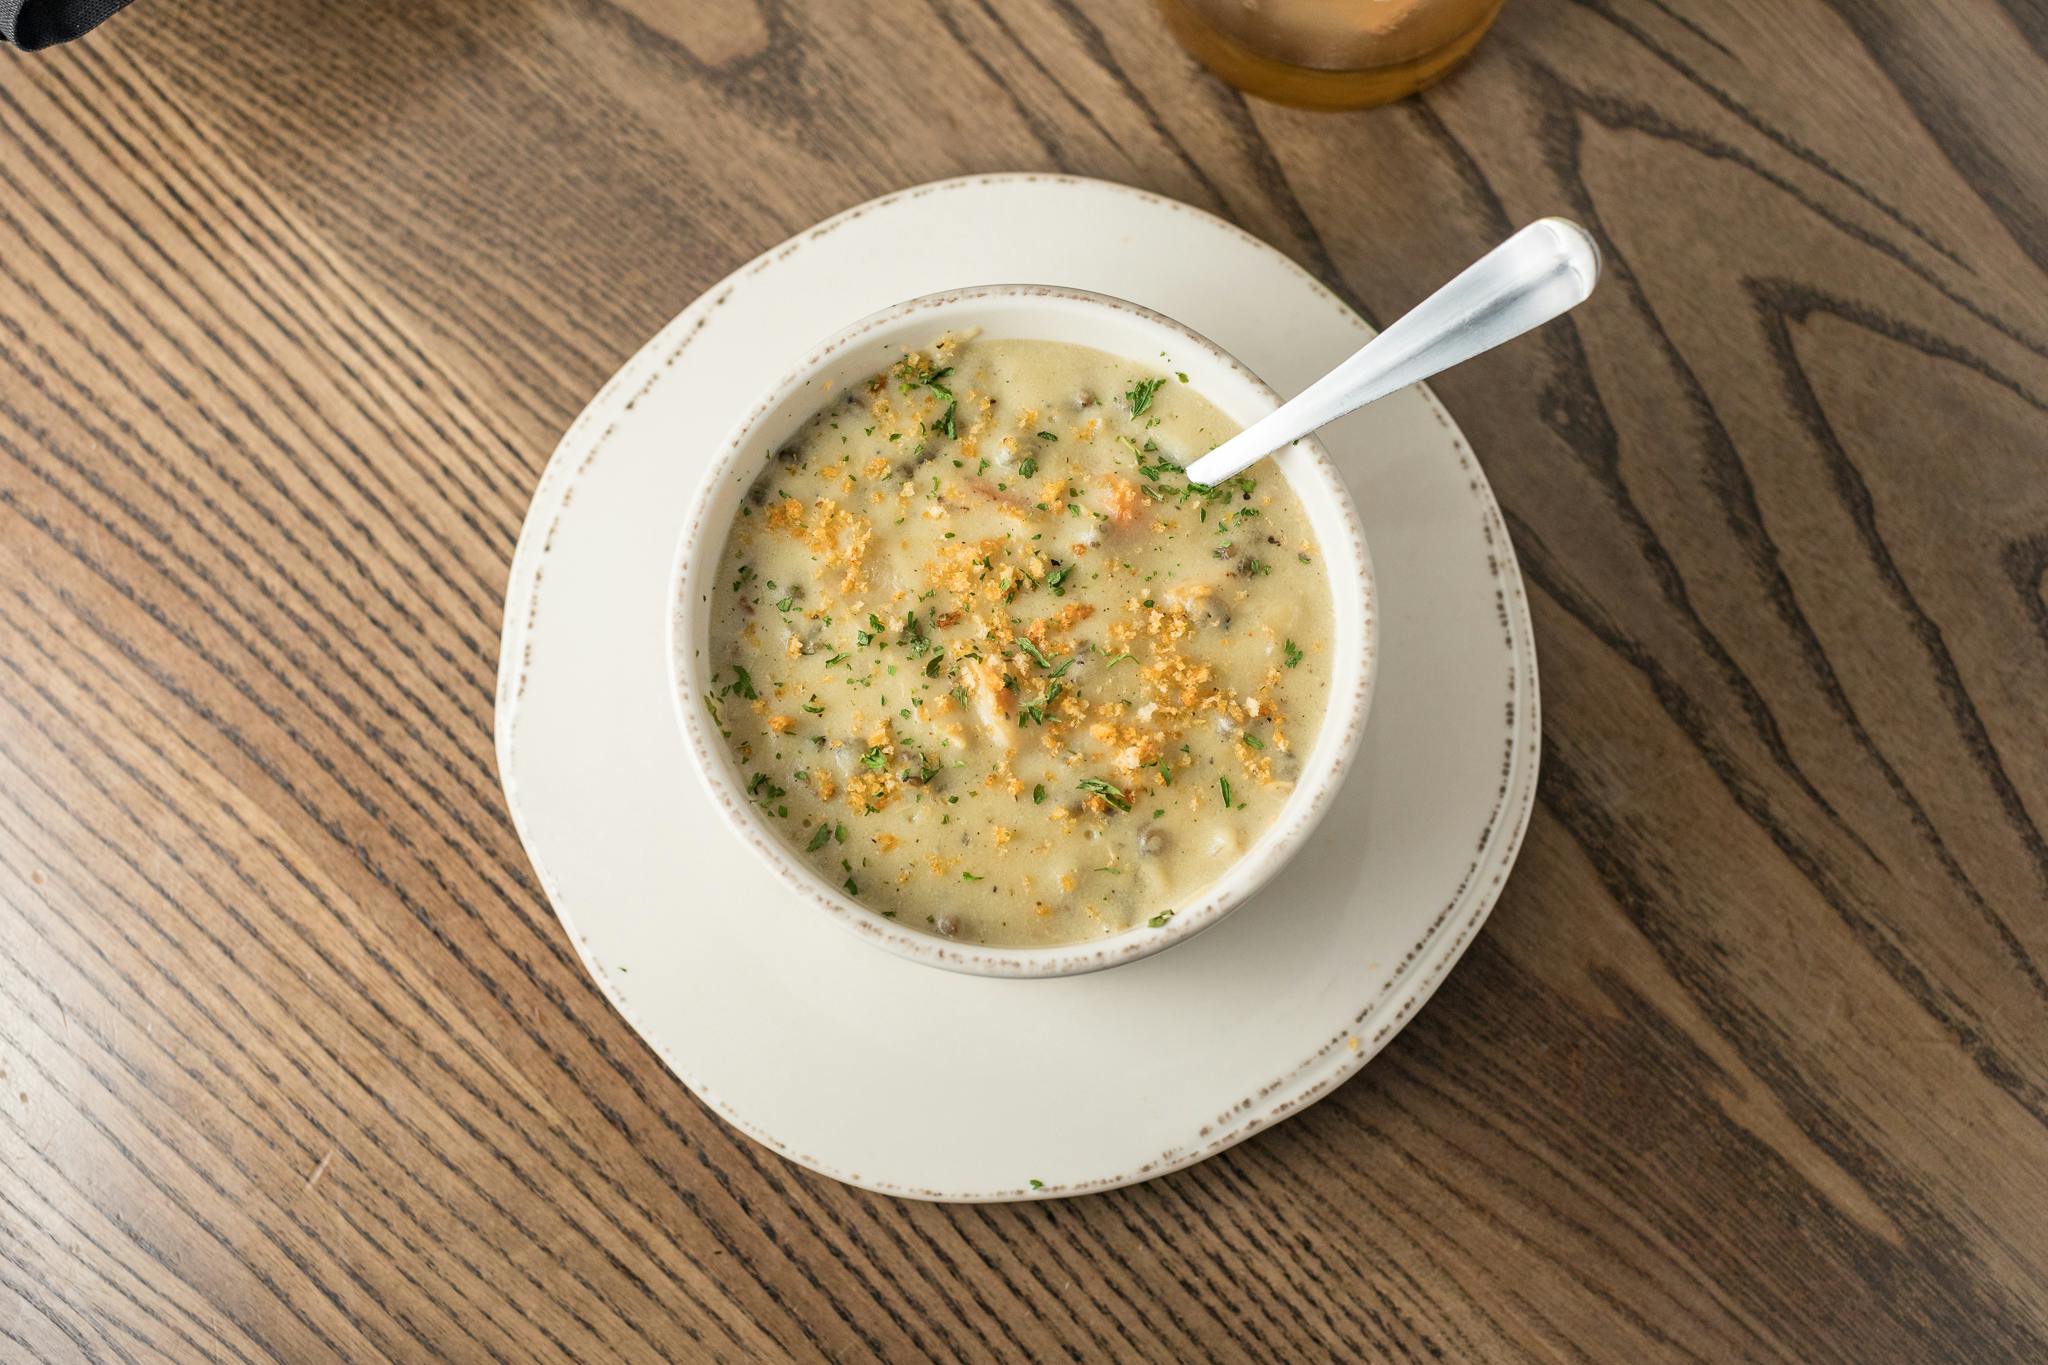 Minnesota Chicken Wild Rice Soup from Grizzly's Wood-Fired Grill in Eau Claire, WI